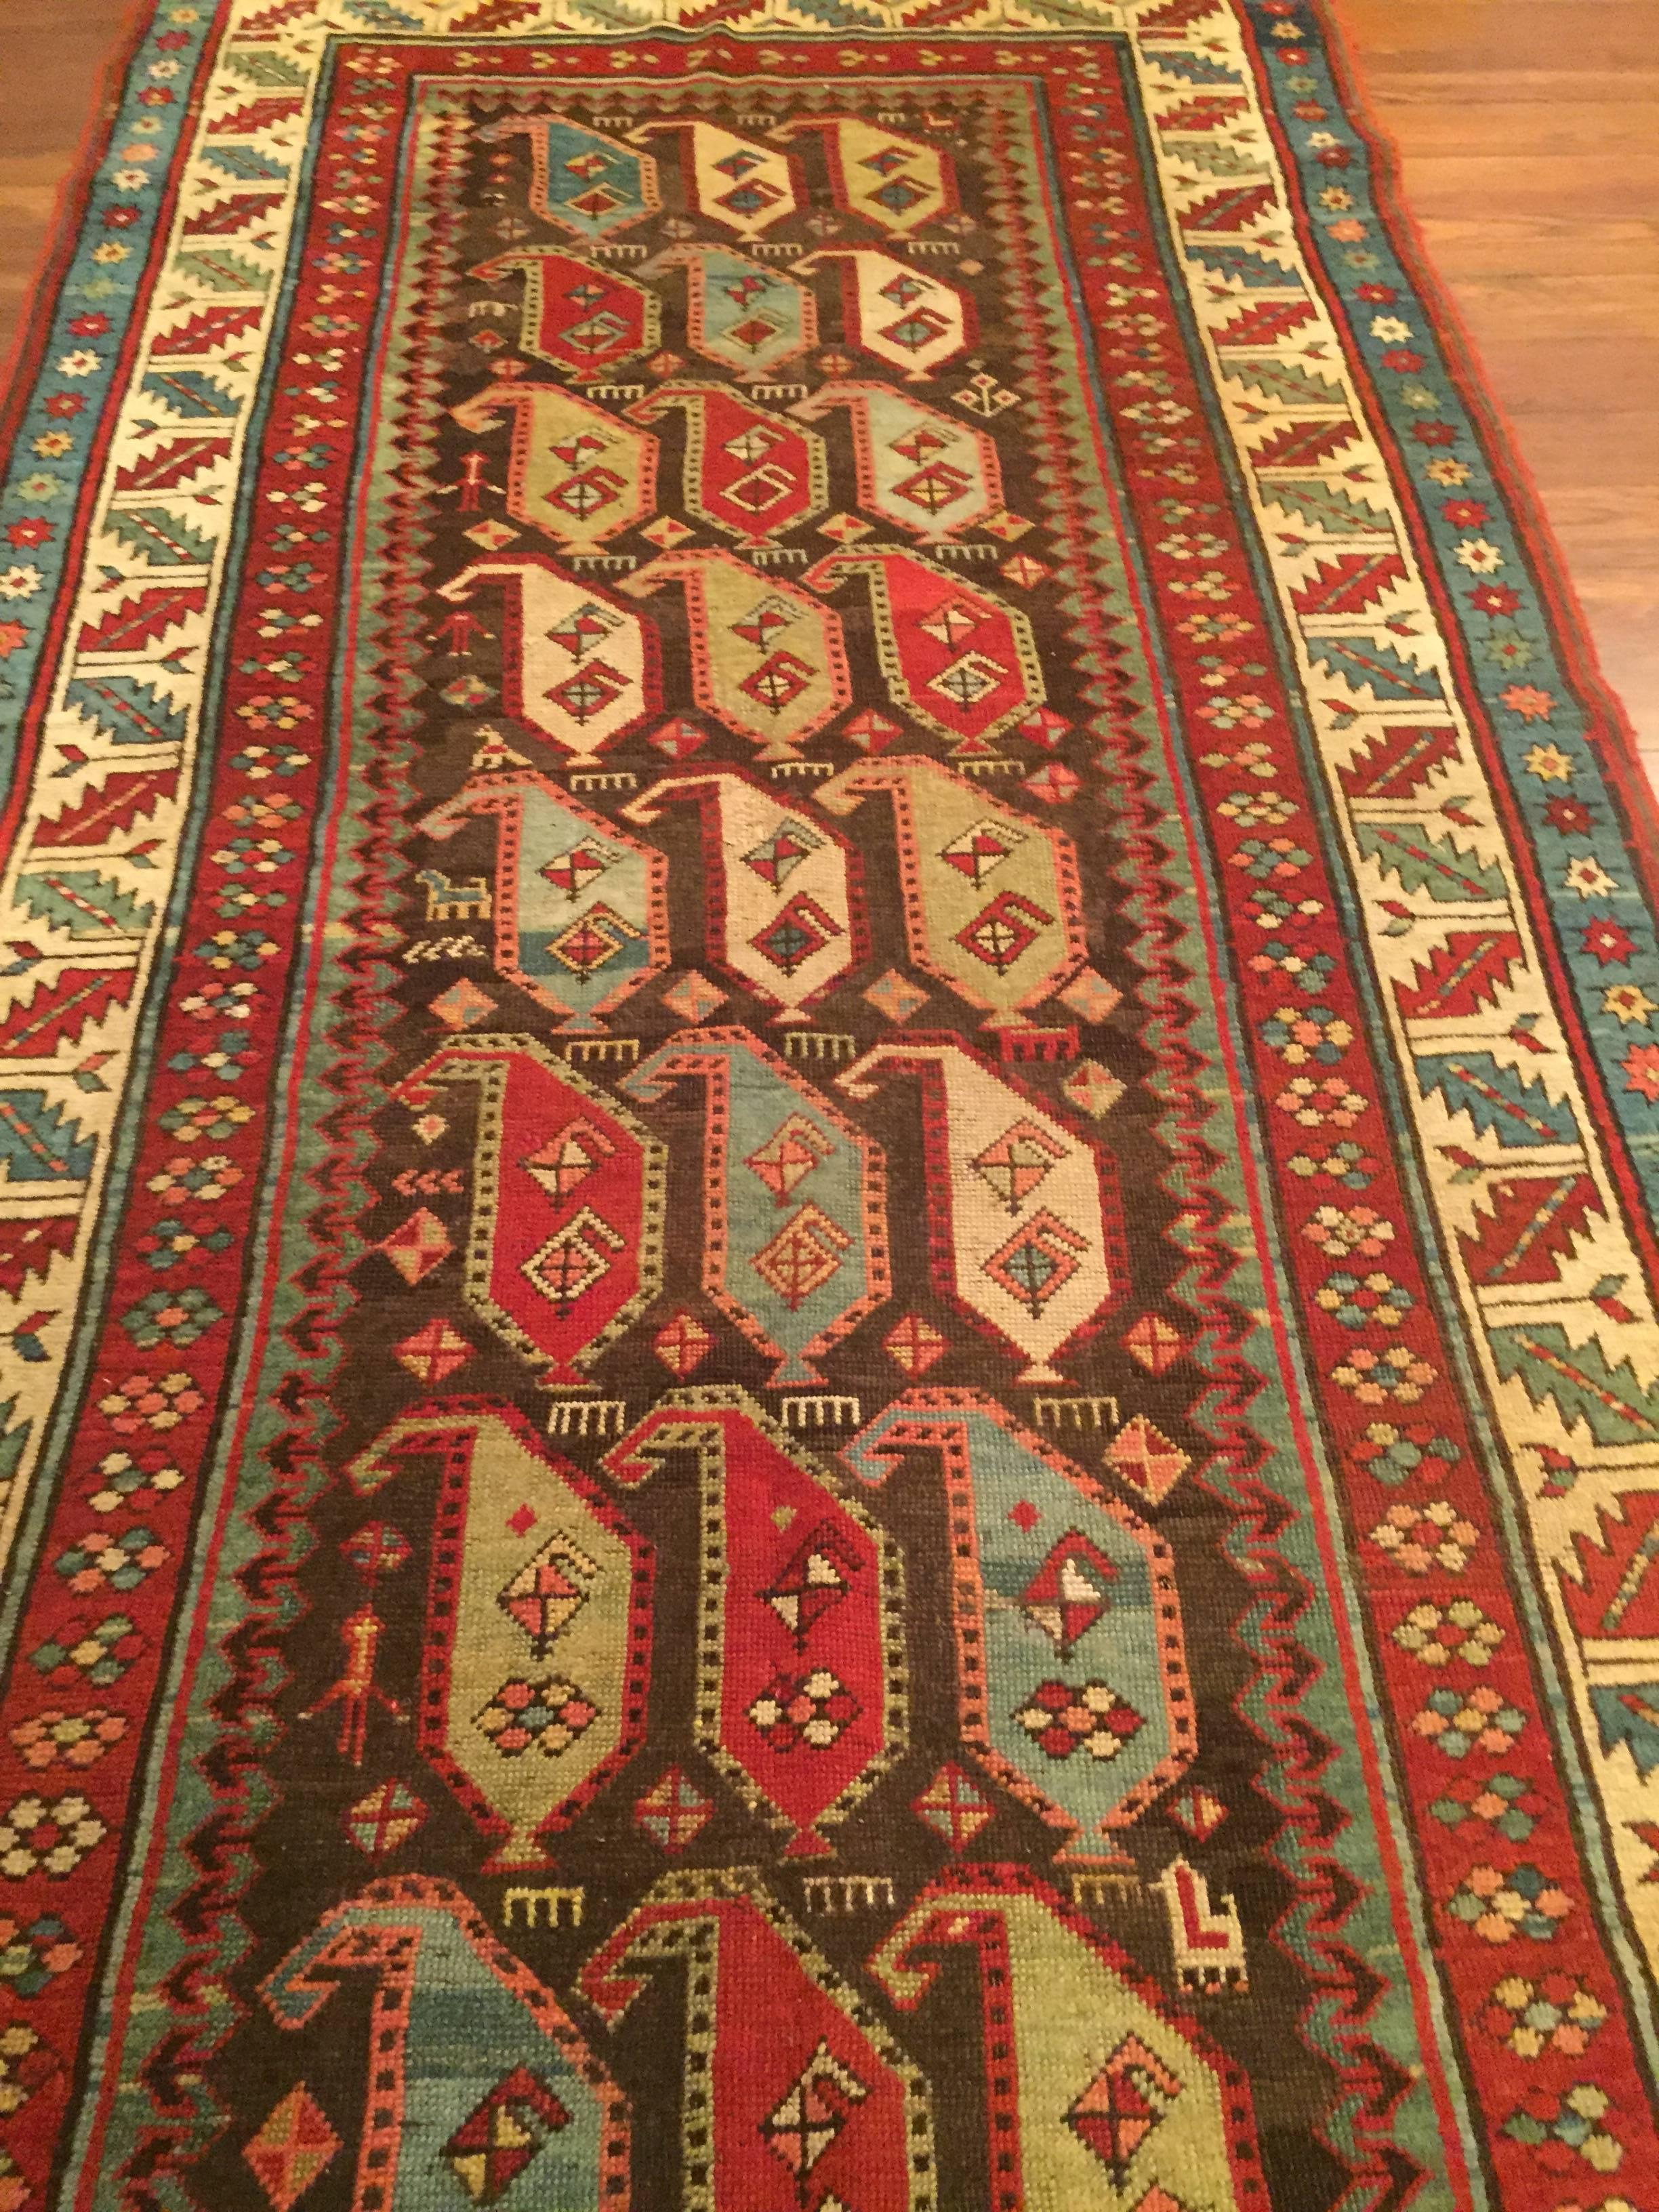 Late 19th Century Antique Caucasian Karabaugh Rug In Good Condition For Sale In Louisville, KY